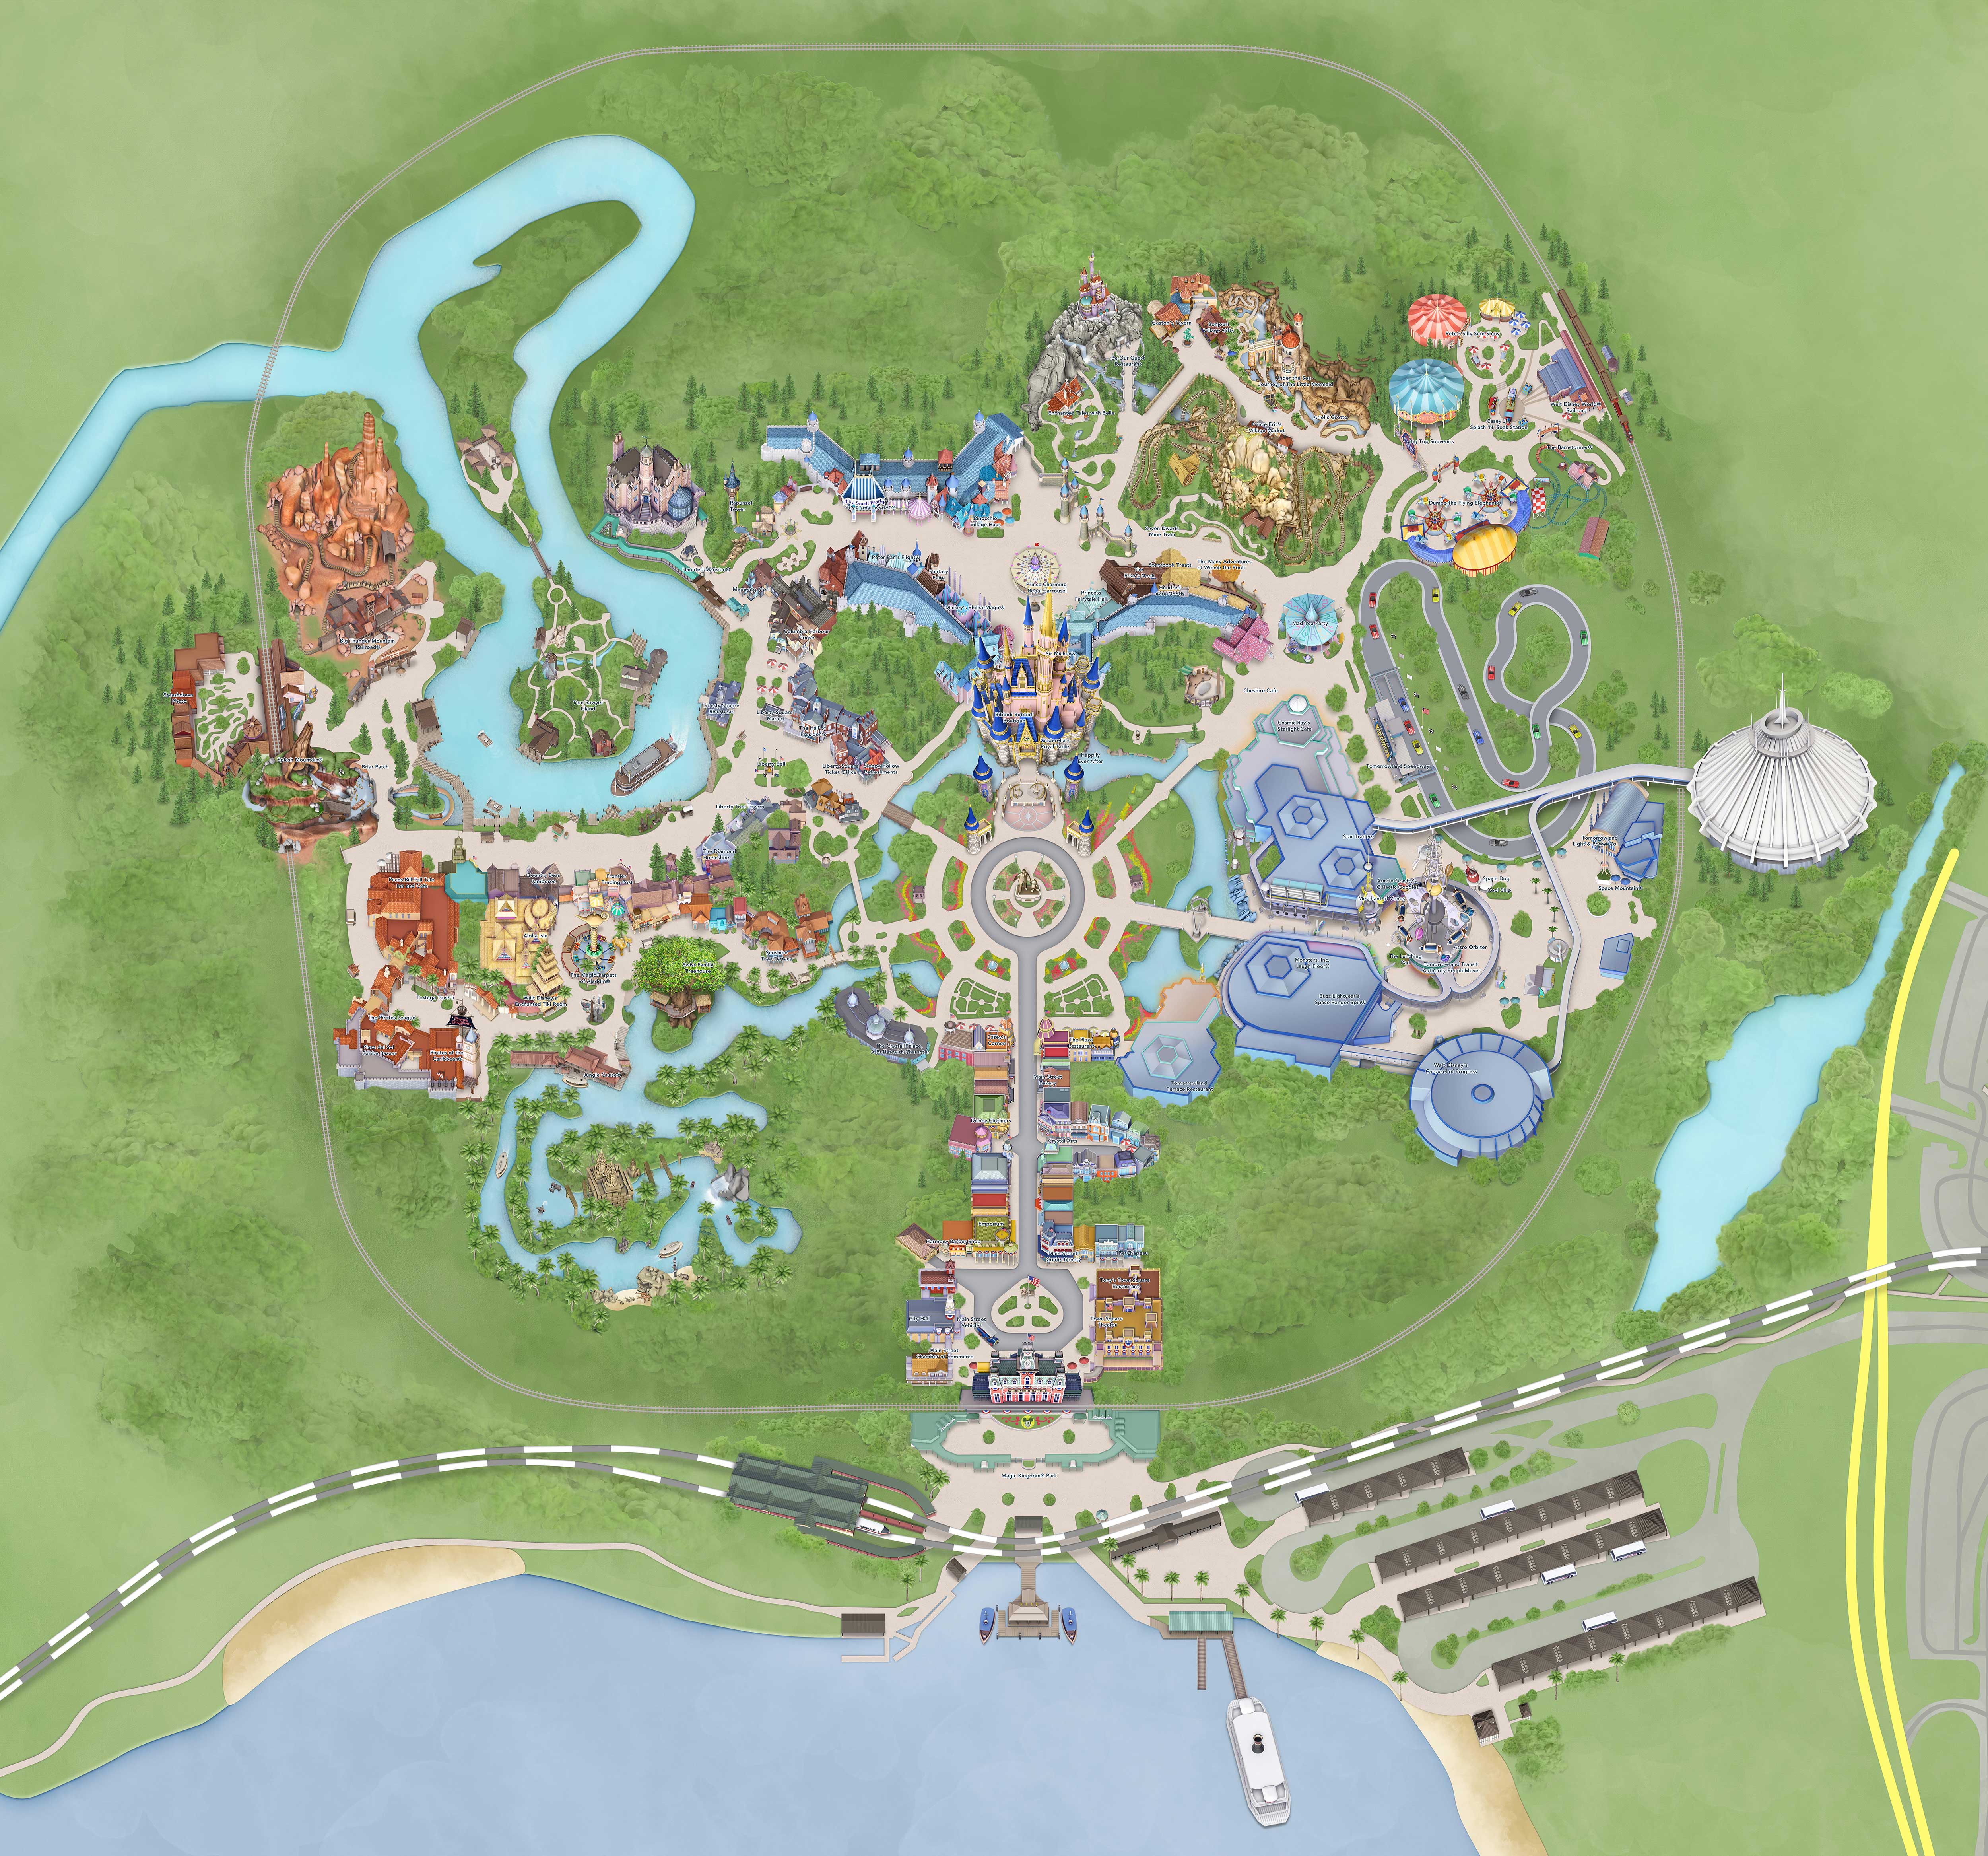 My Disney Experience digital map update for Magic Kingdom includes new-look castle and Grand Floridan walkway